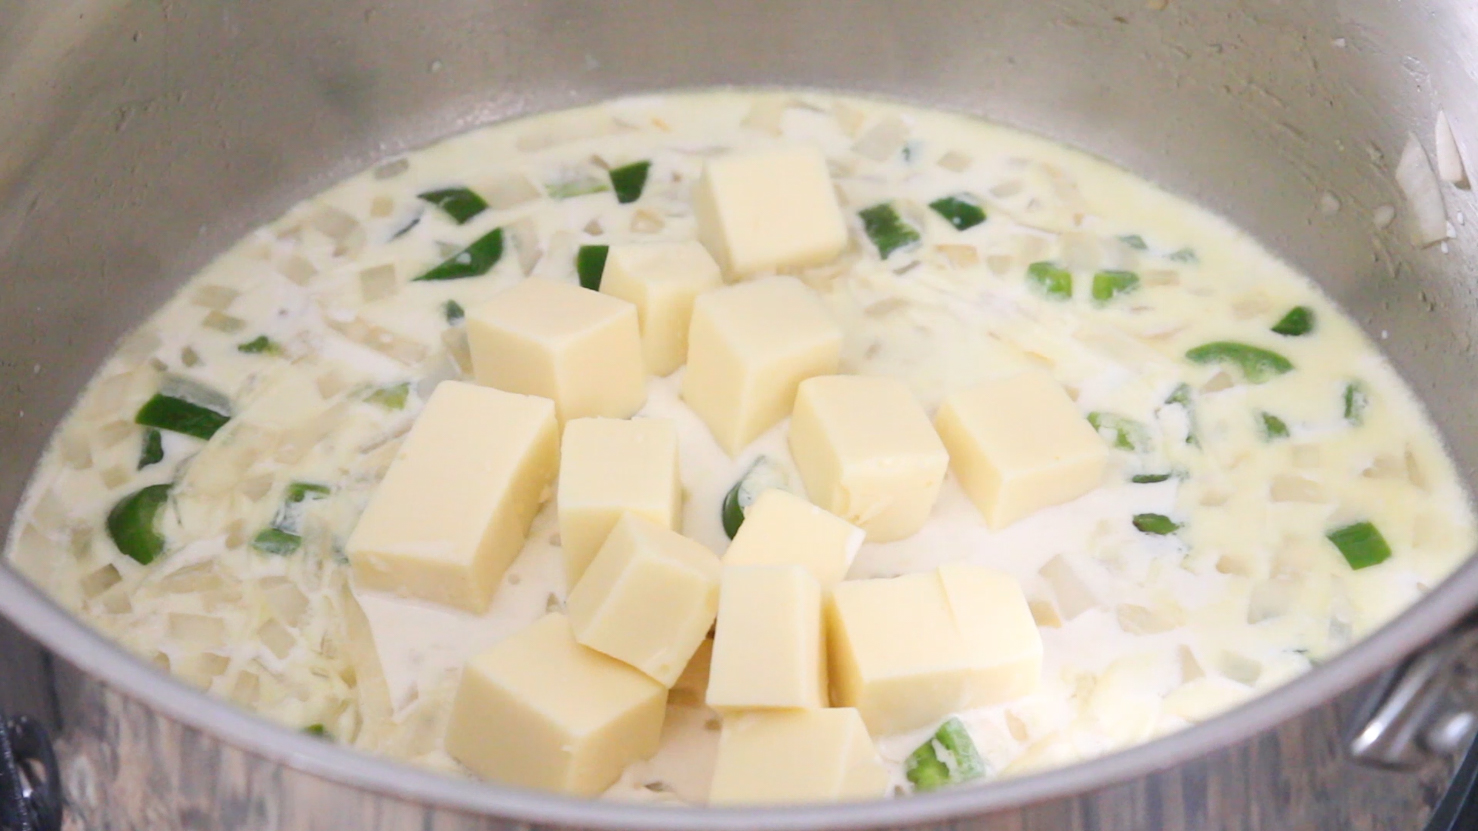 Chunks of queso blanco being added to the queso